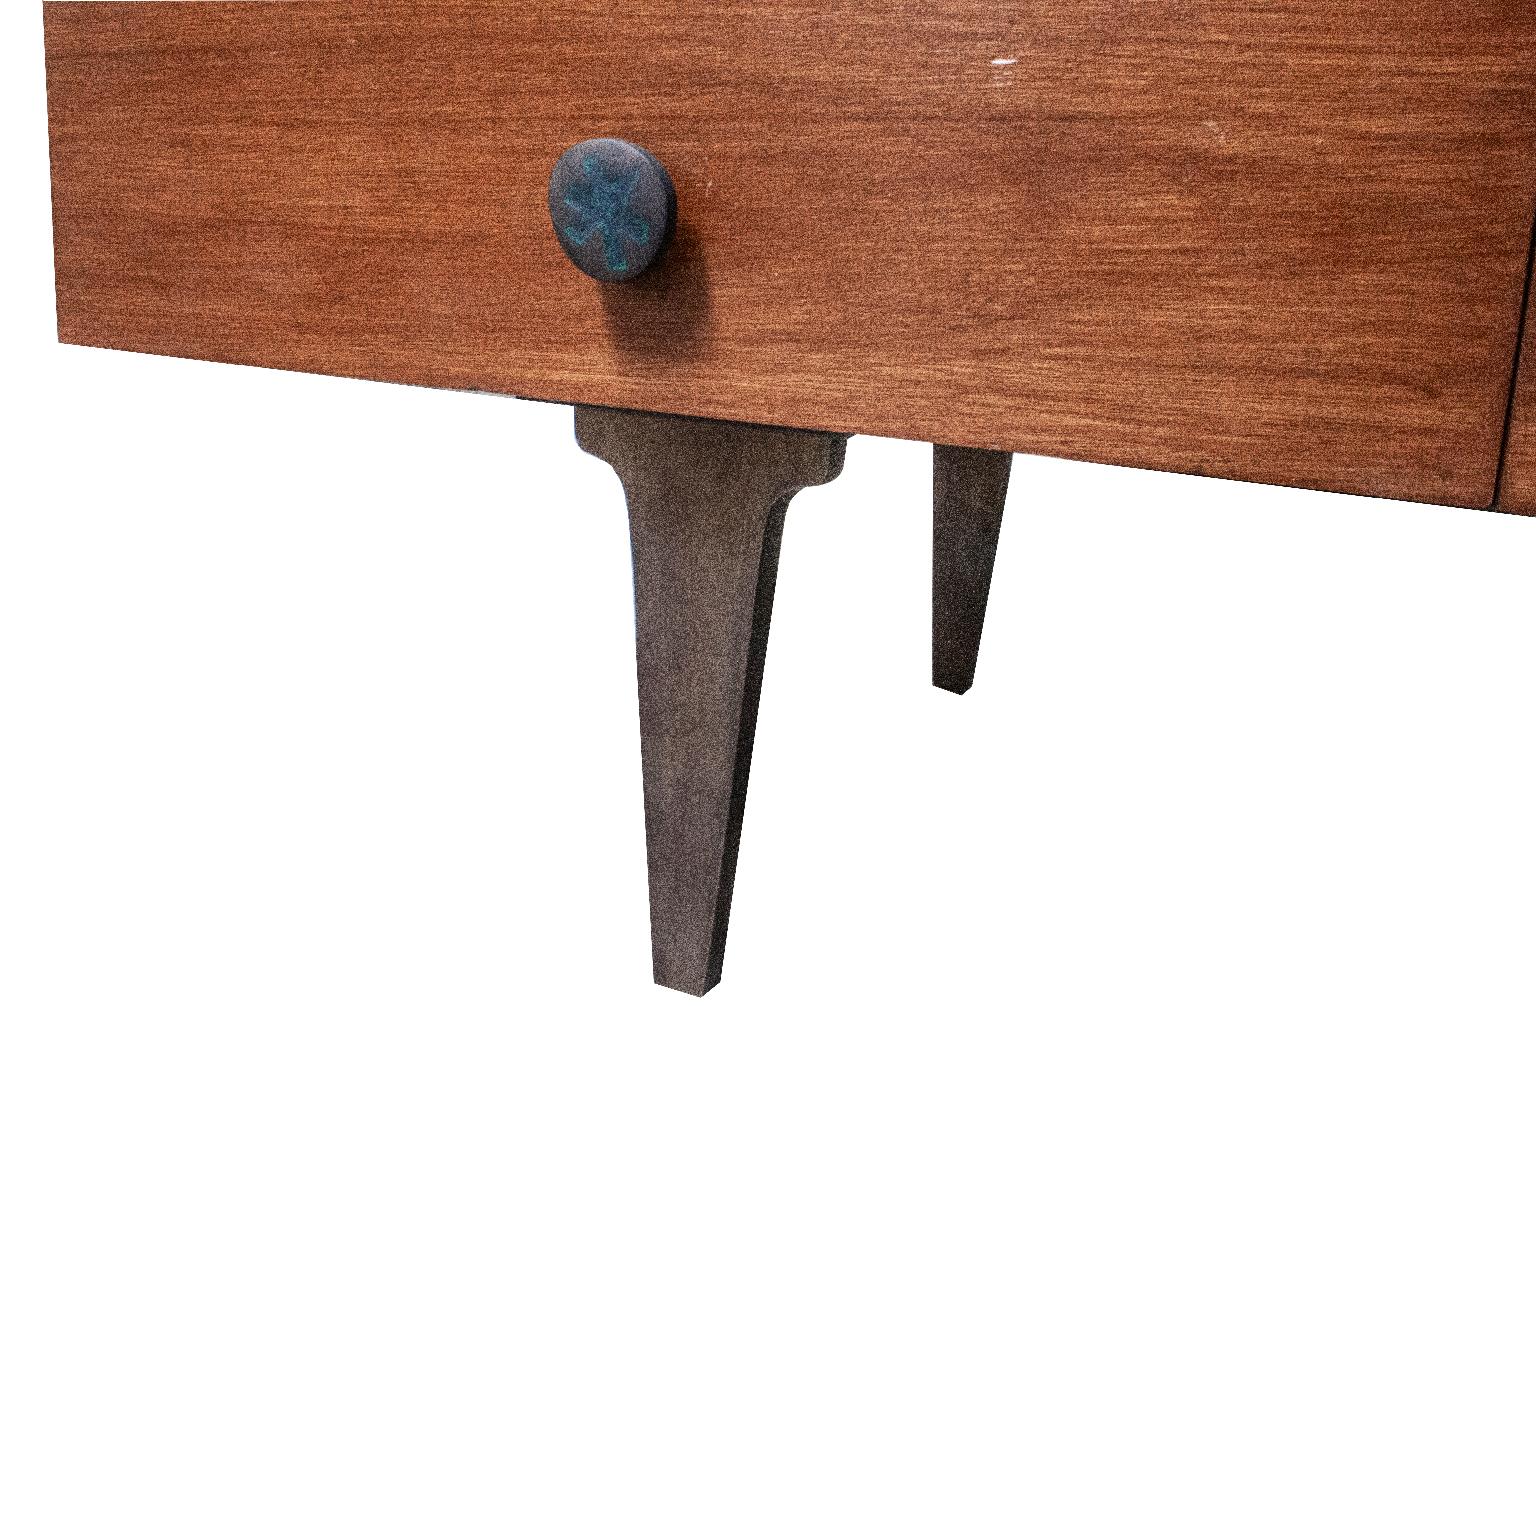 Pepe Mendoza buffet
The cabinet has 12 drawers with brass pulls with Pepe Mendoza stamp, all drawers are built with solid mahogany wood. The furniture is in perfect condition, the legs on which it is held are also made of solid brass.